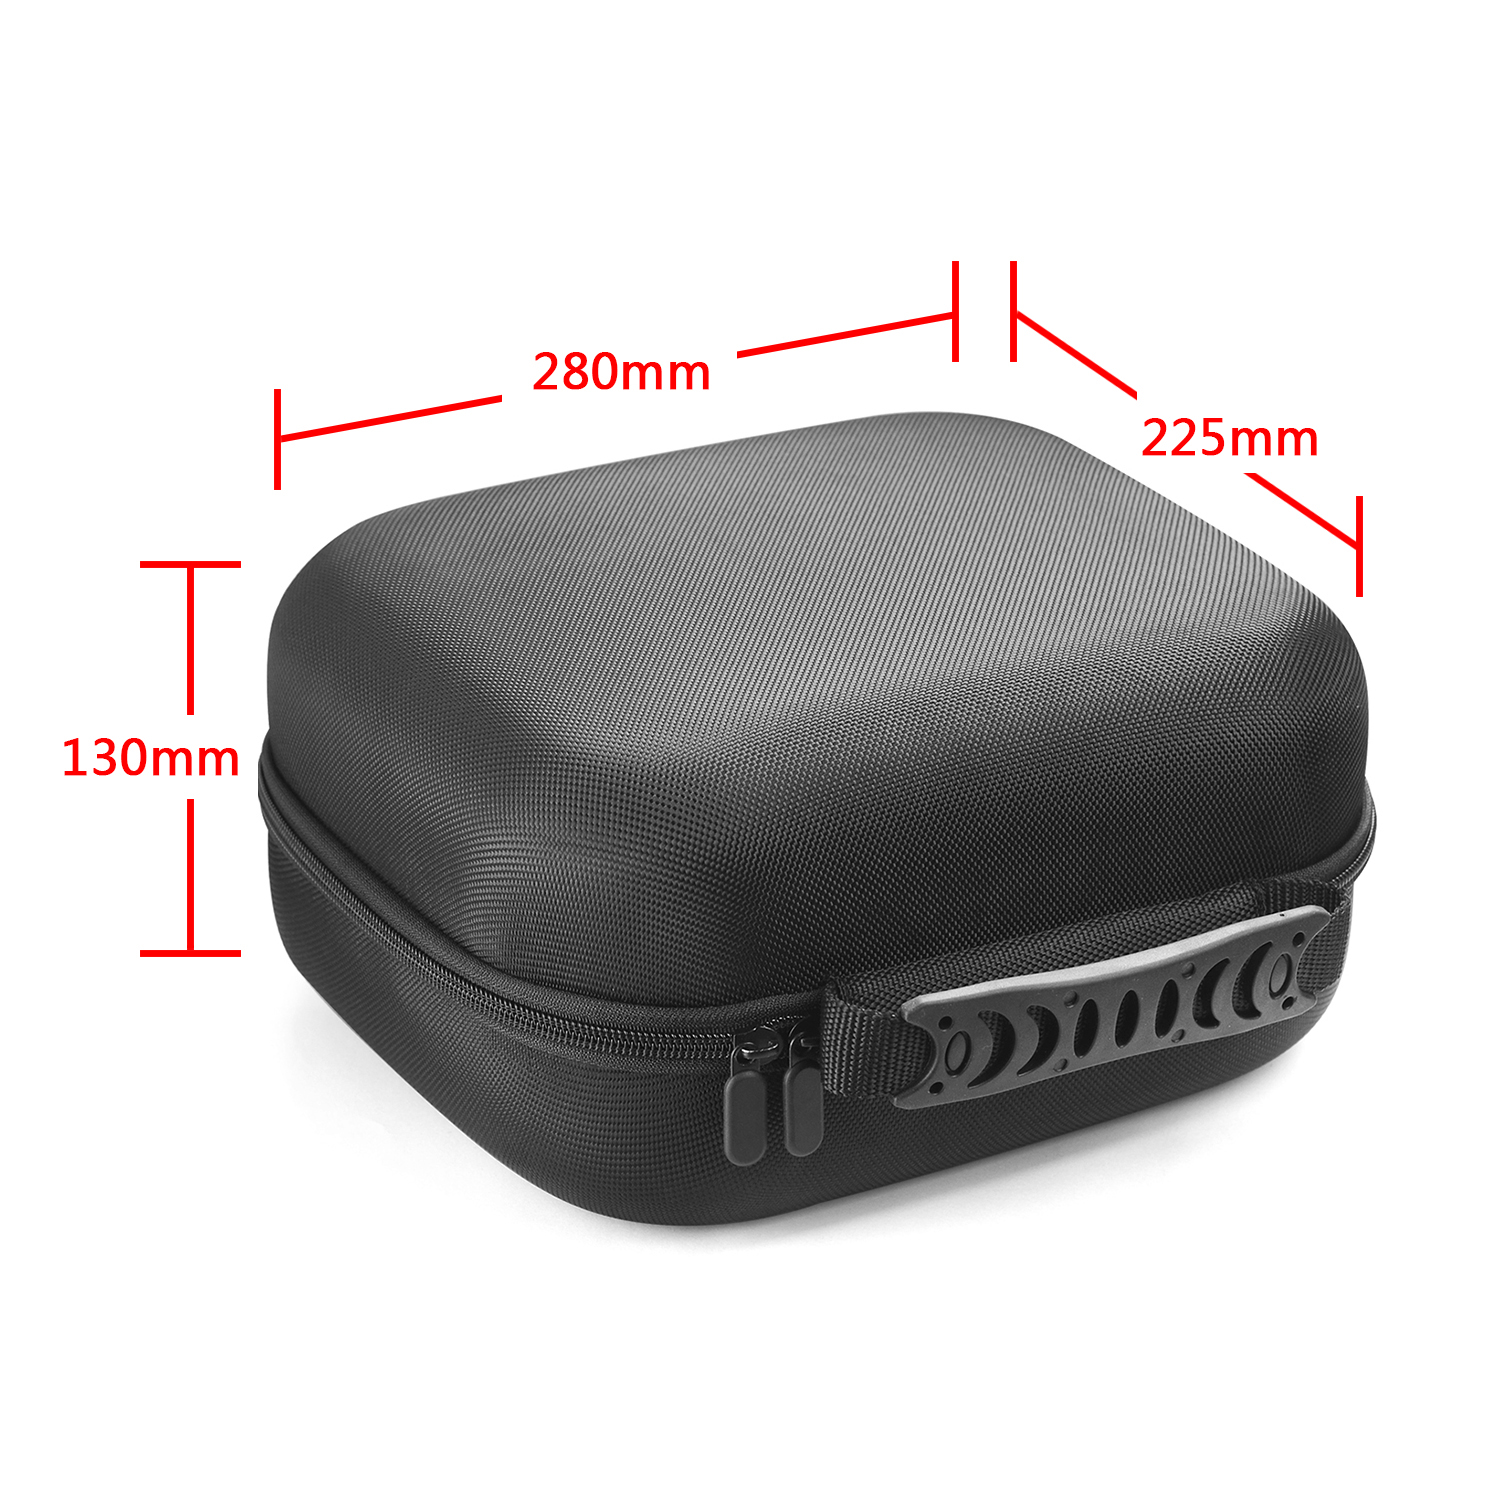 Bakeey-Earphone-Carrying-Case-Shockproof-Hard-Portable-Headphone-Storage-Bag-Protective-Box-for-Beat-1800698-7